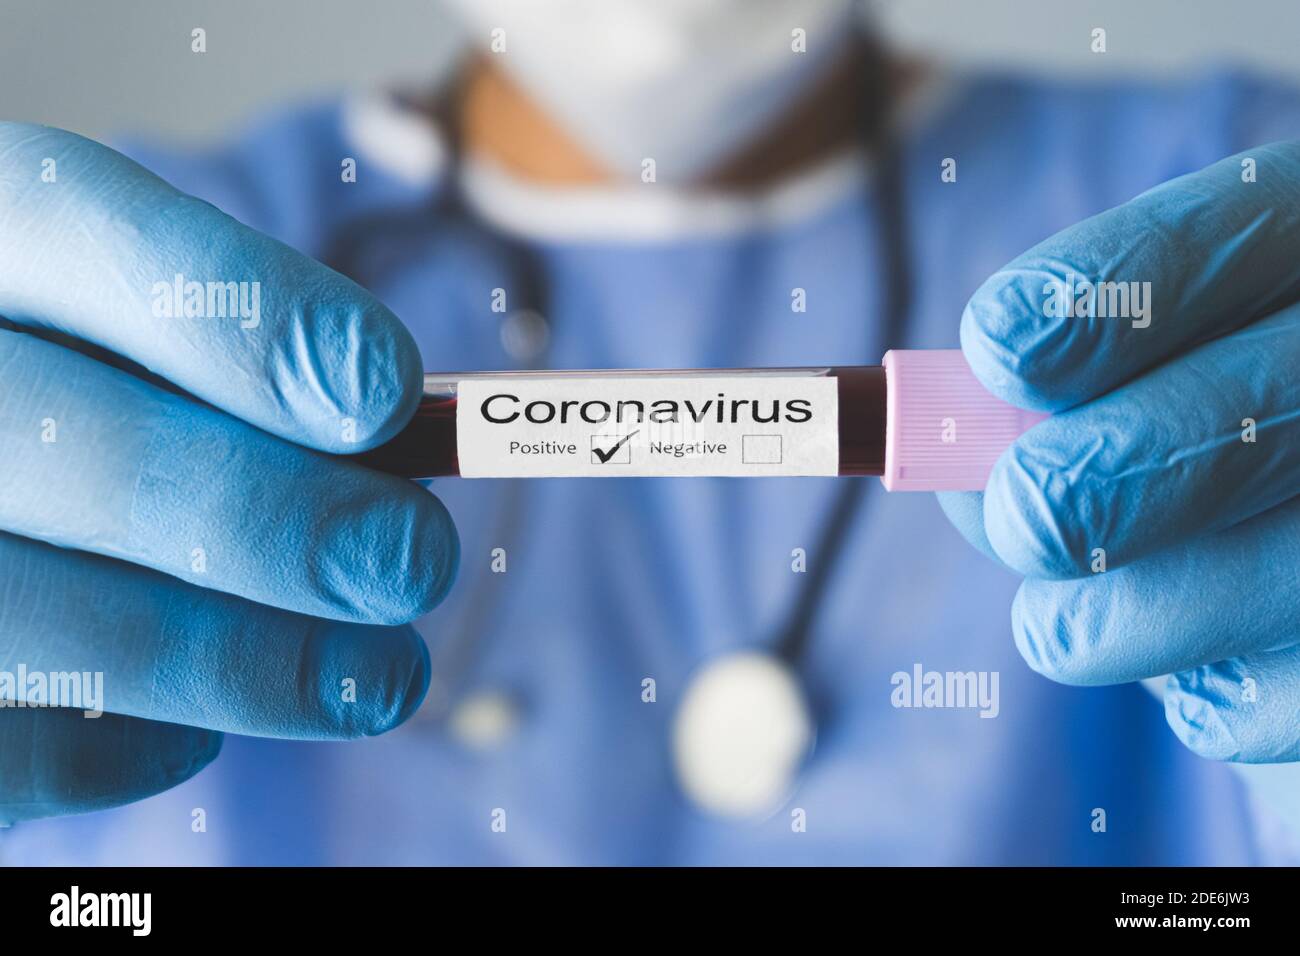 Positive result of the Coronavirus test, Covid-19. Doctor showing the result of blood test. 2019 Novel Coronavirus concept. Stock Photo